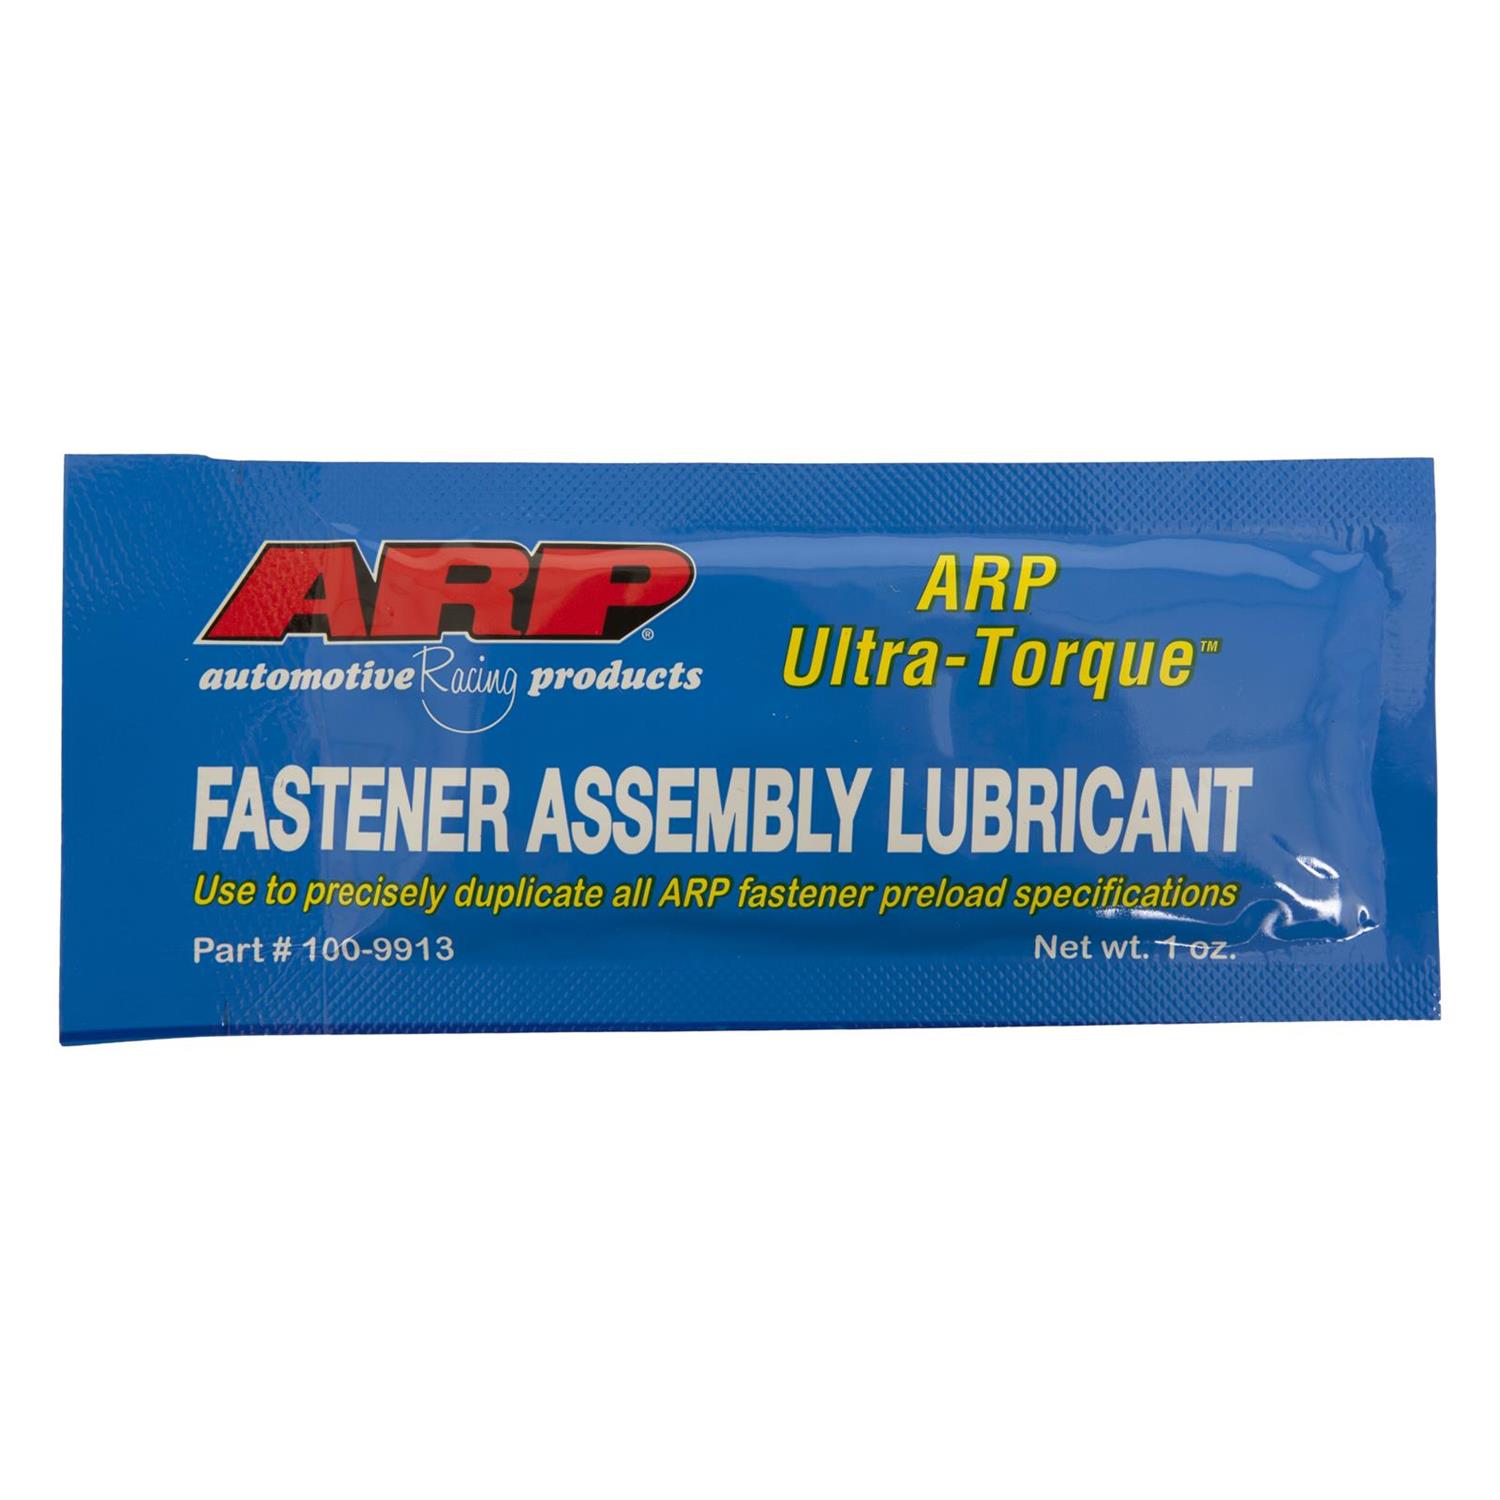 www.americanspareparts.de - ASSEMBLY LUBRICANT